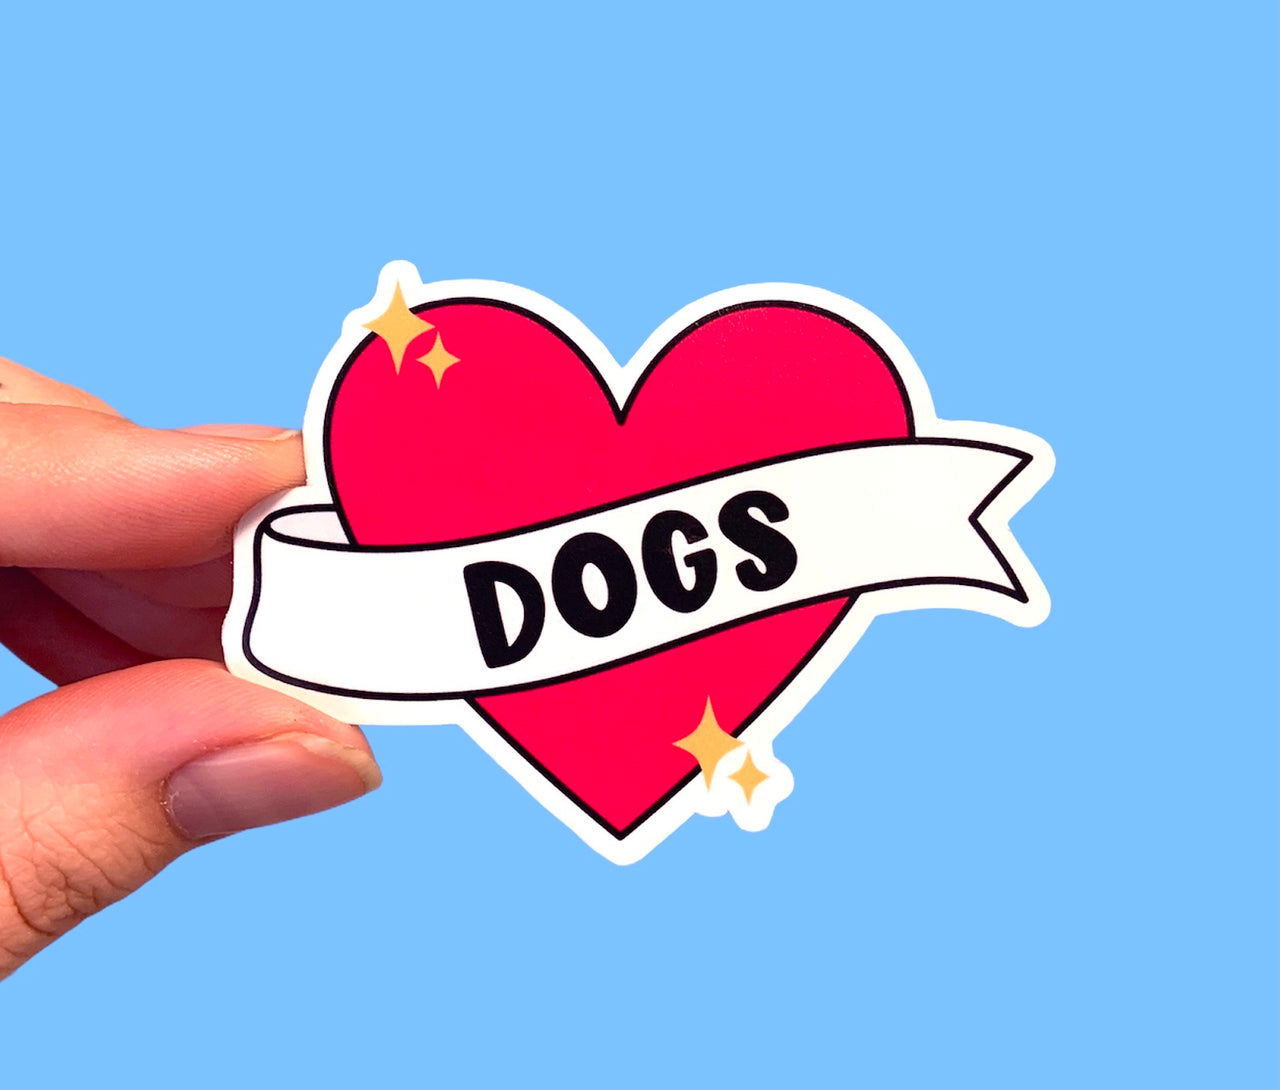 I love dogs 💖 (pack of 3 or 5 stickers)